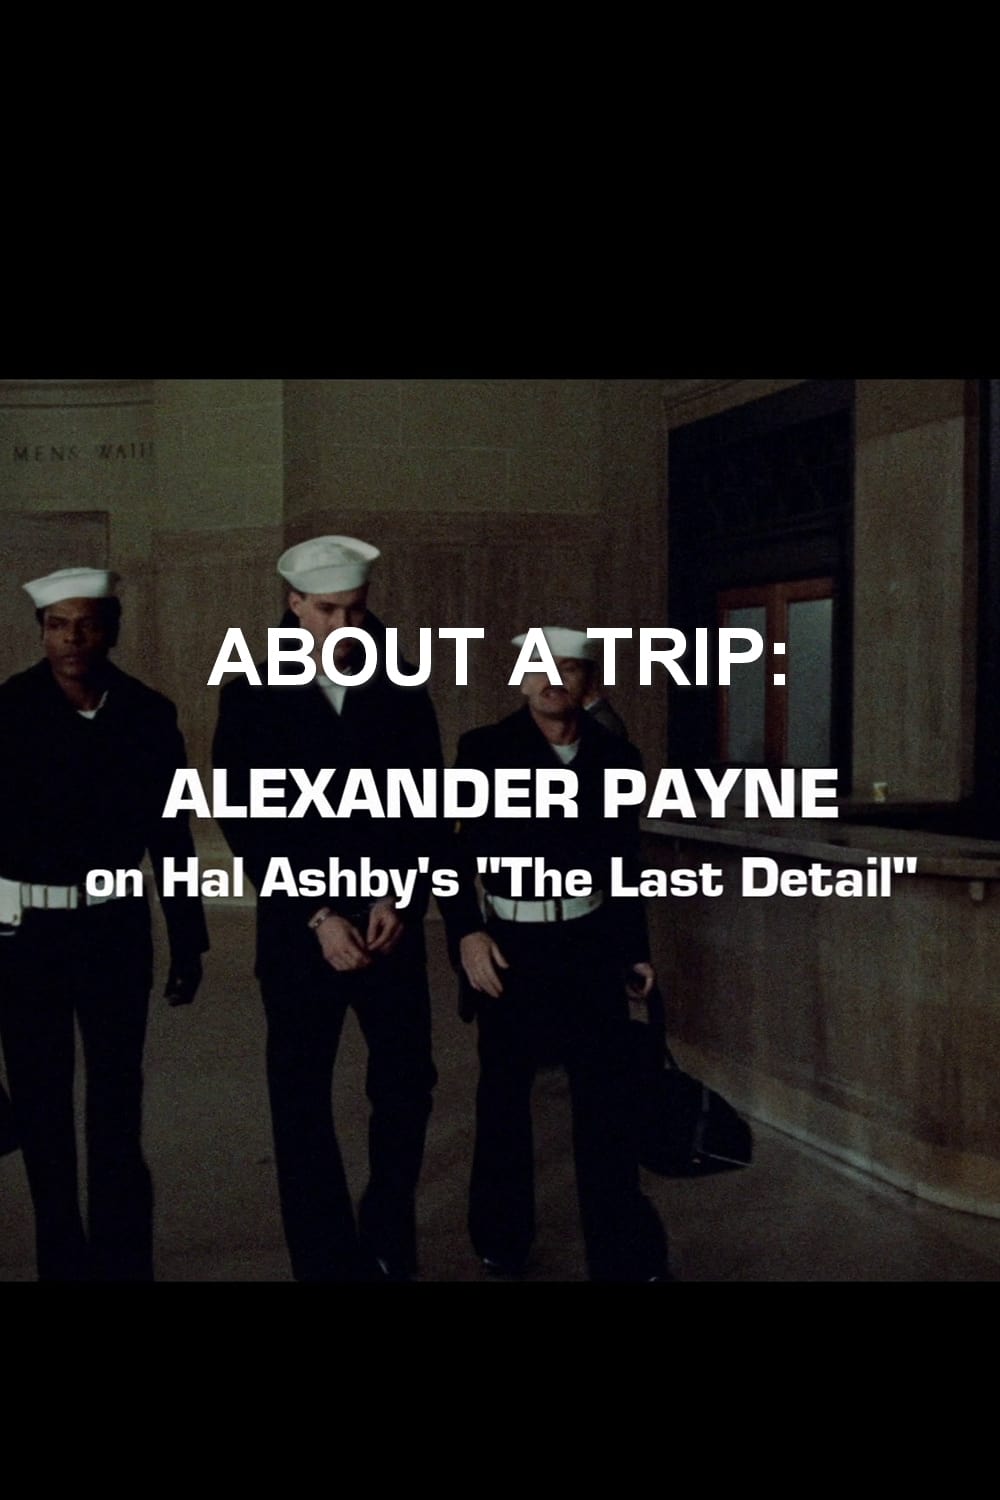 About a Trip: Alexander Payne on Hal Ashby's 'The Last Detail'